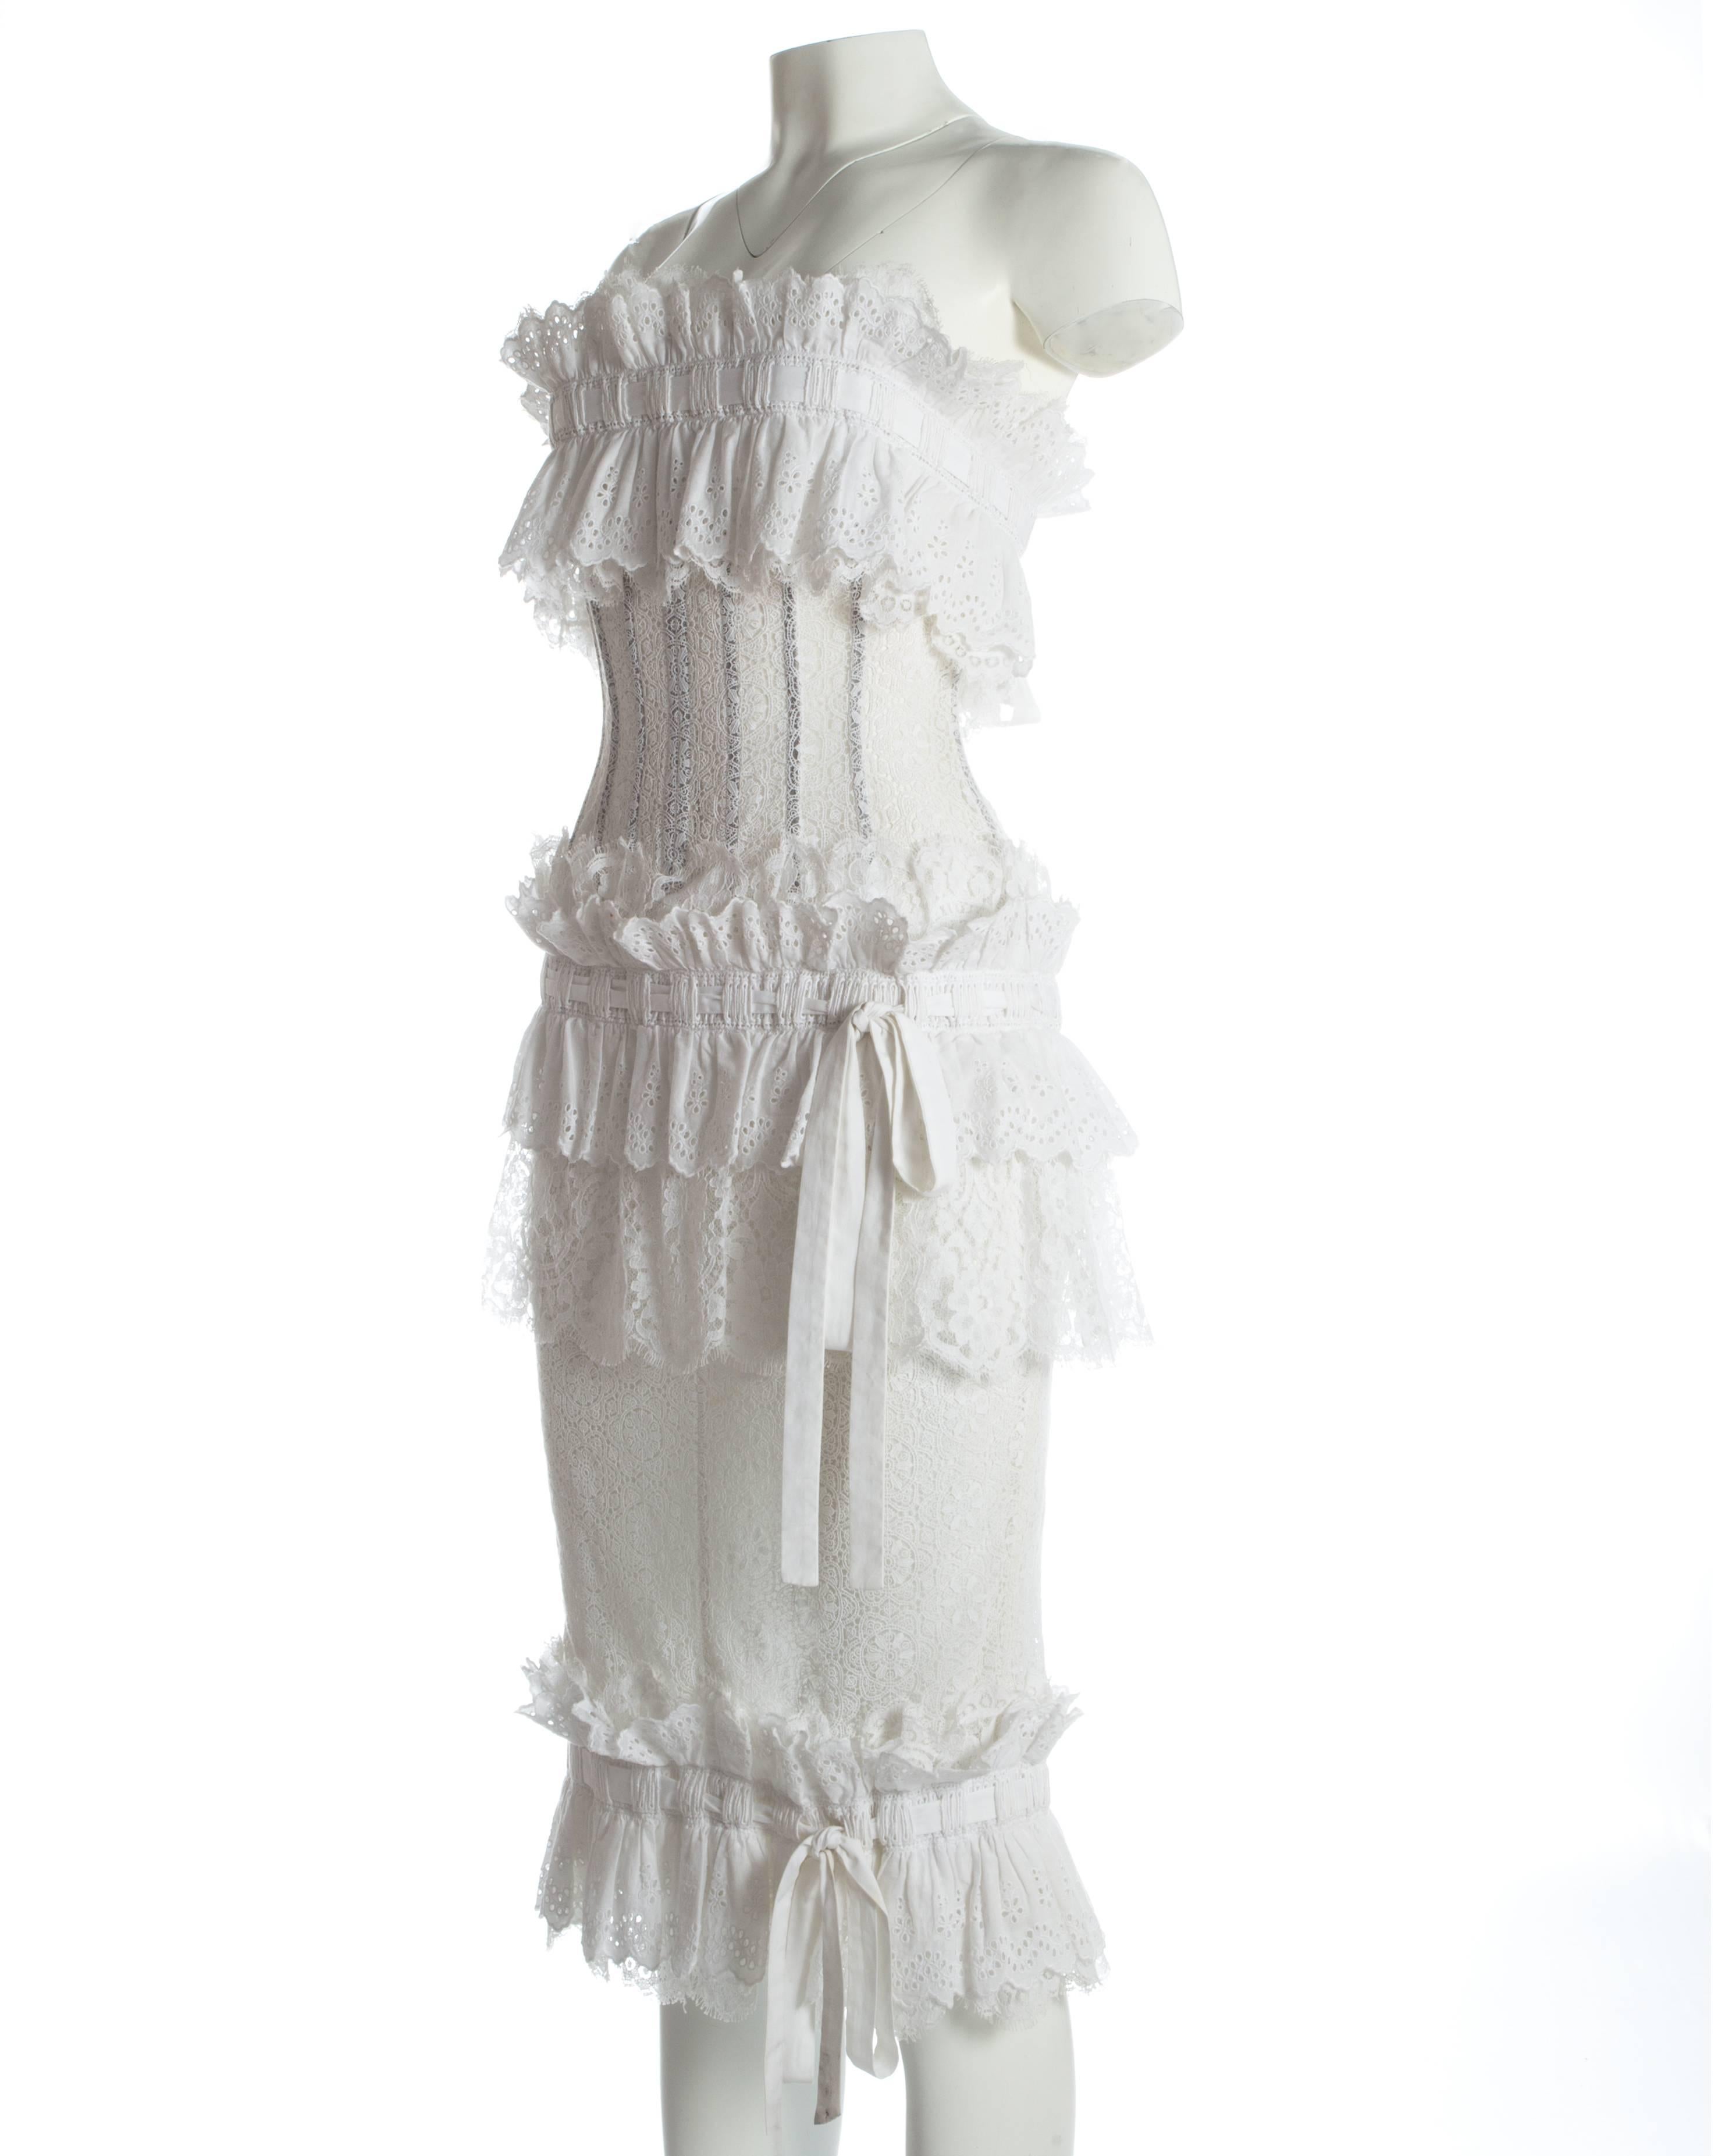 Dolce & Gabbana white Broderie Anglaise and lace corseted dress, S/S 2006 1